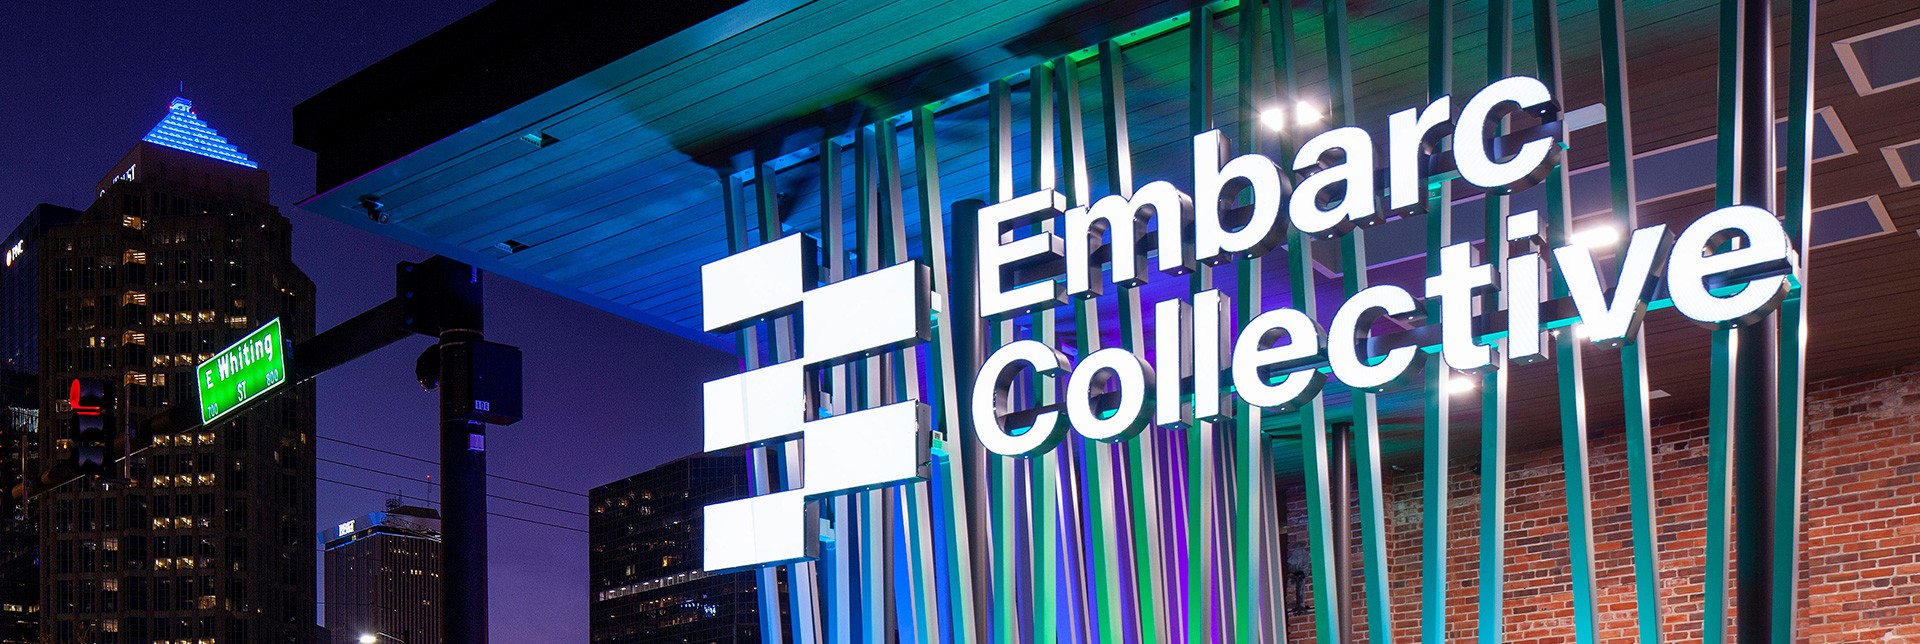 Embarc Collective